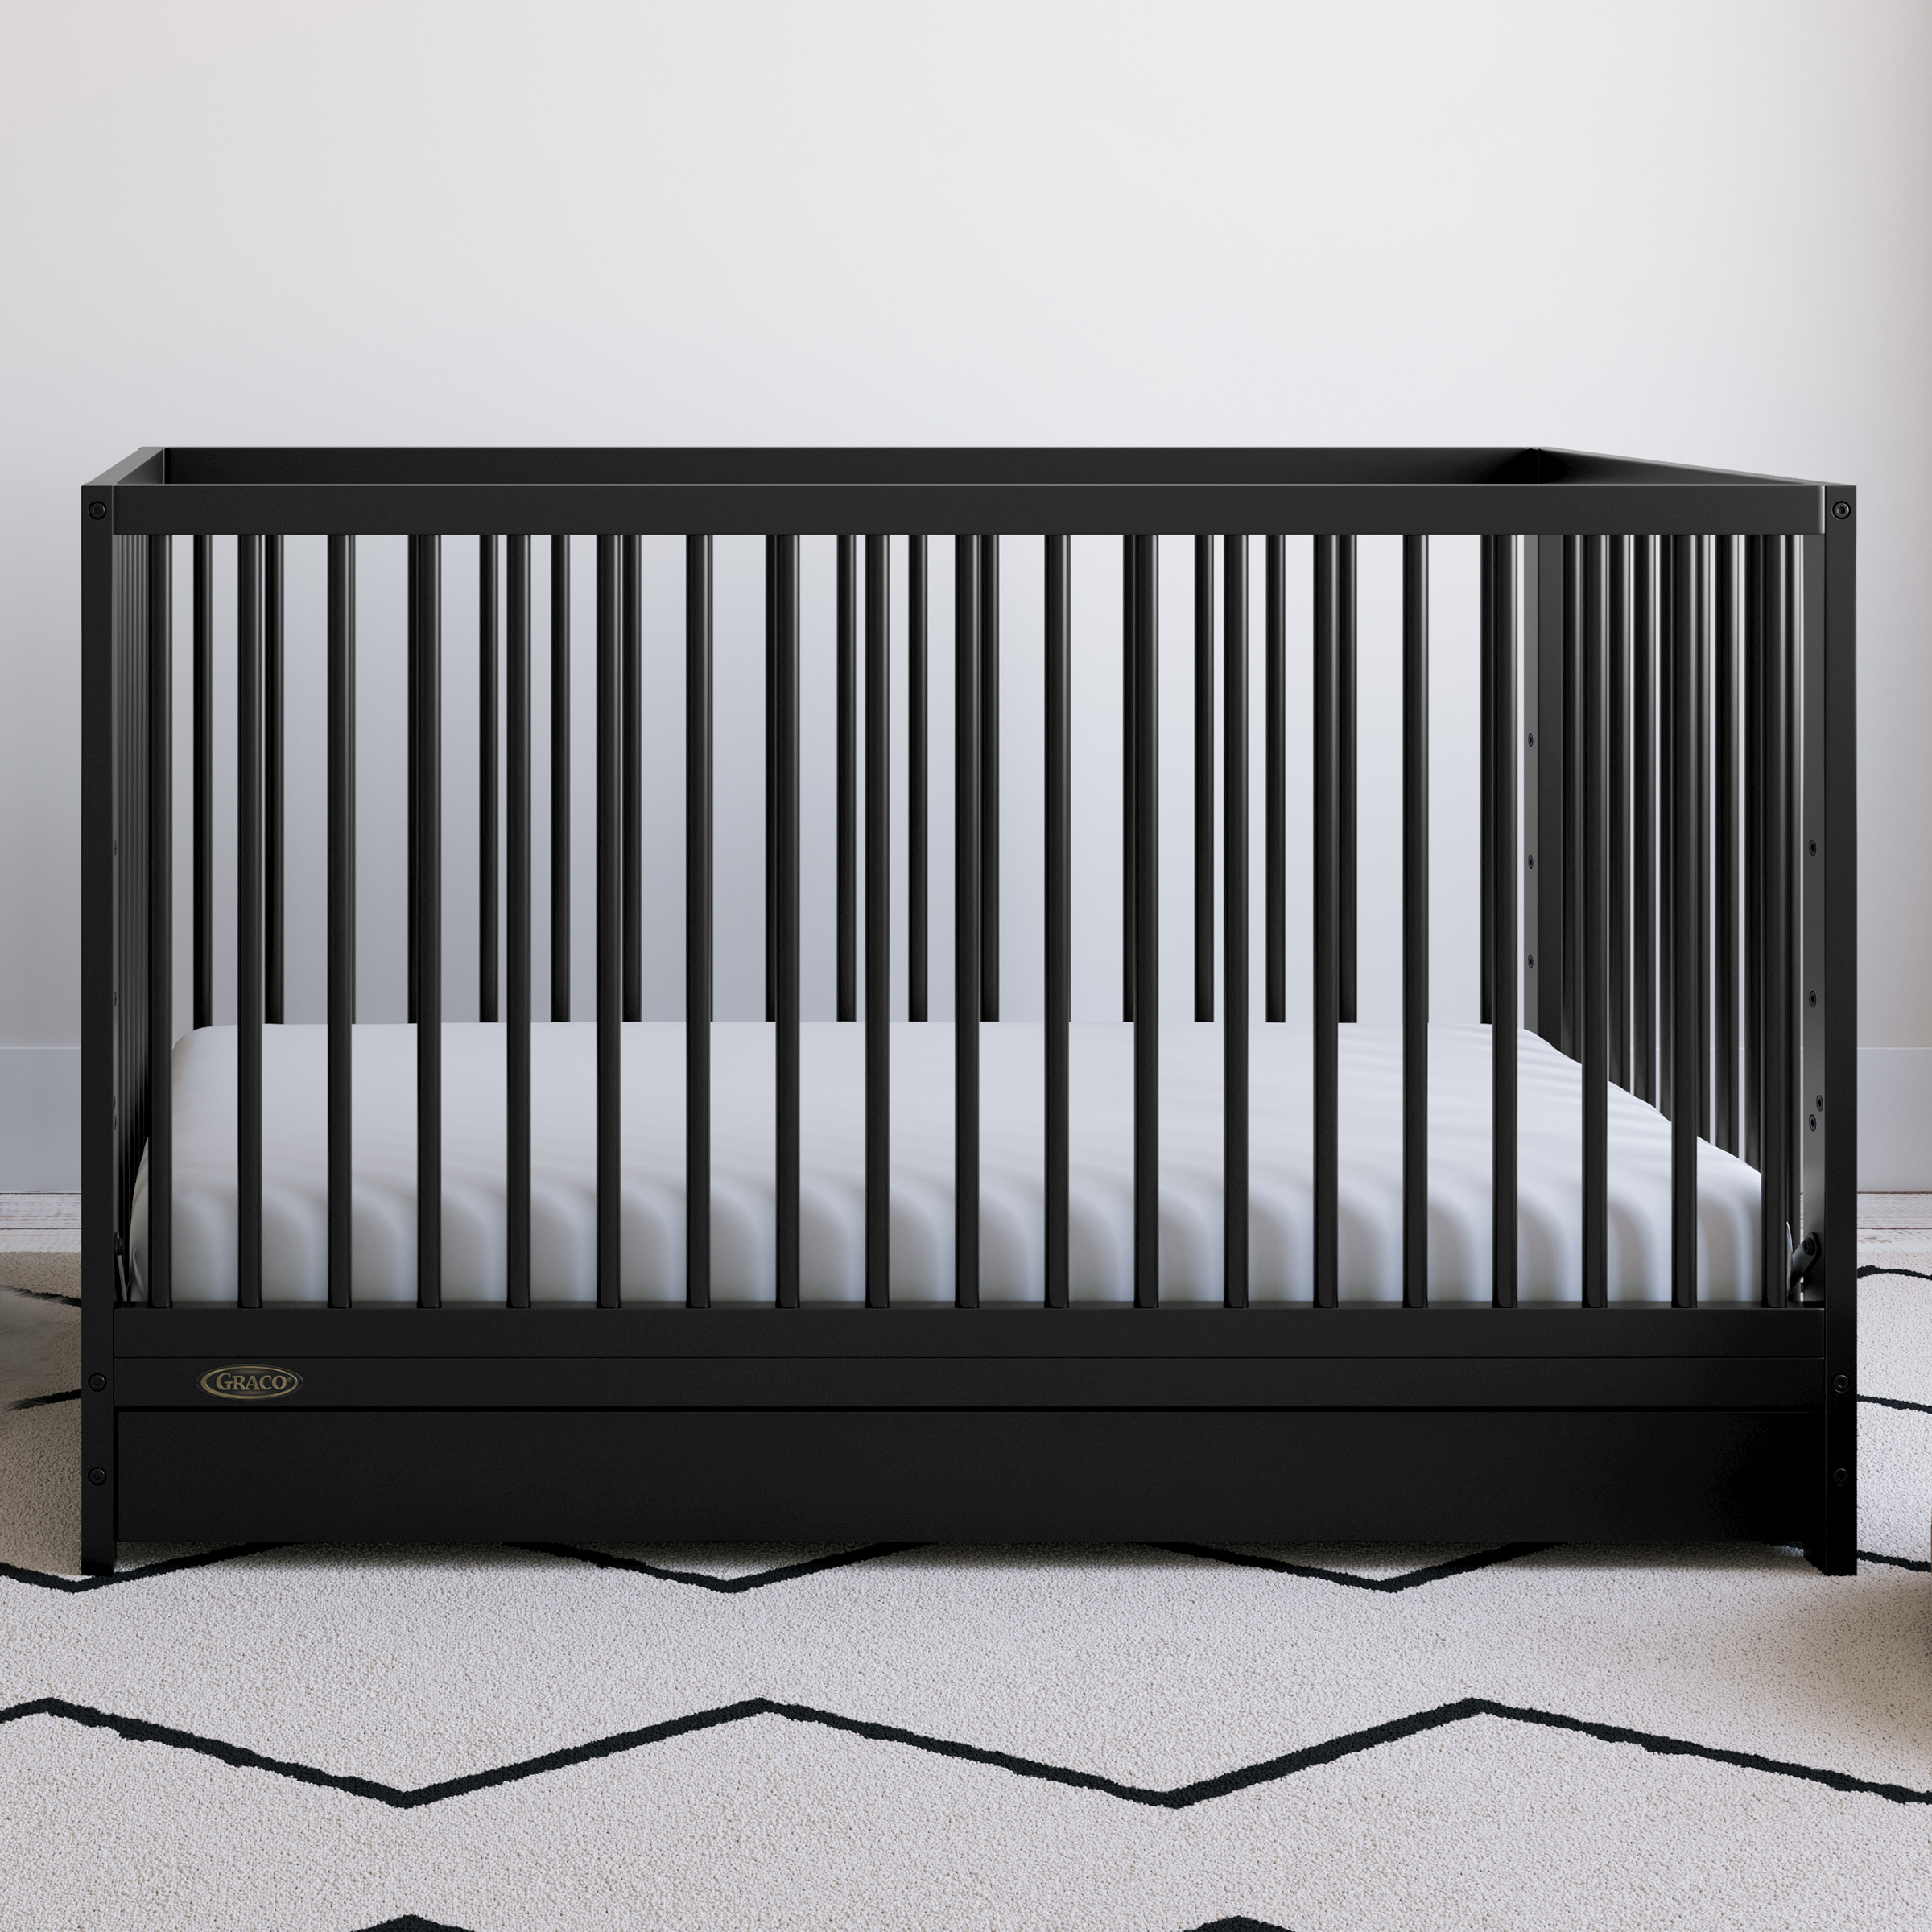 Graco Teddi 5-in-1 Convertible Baby Crib with Drawer, Black - image 3 of 16